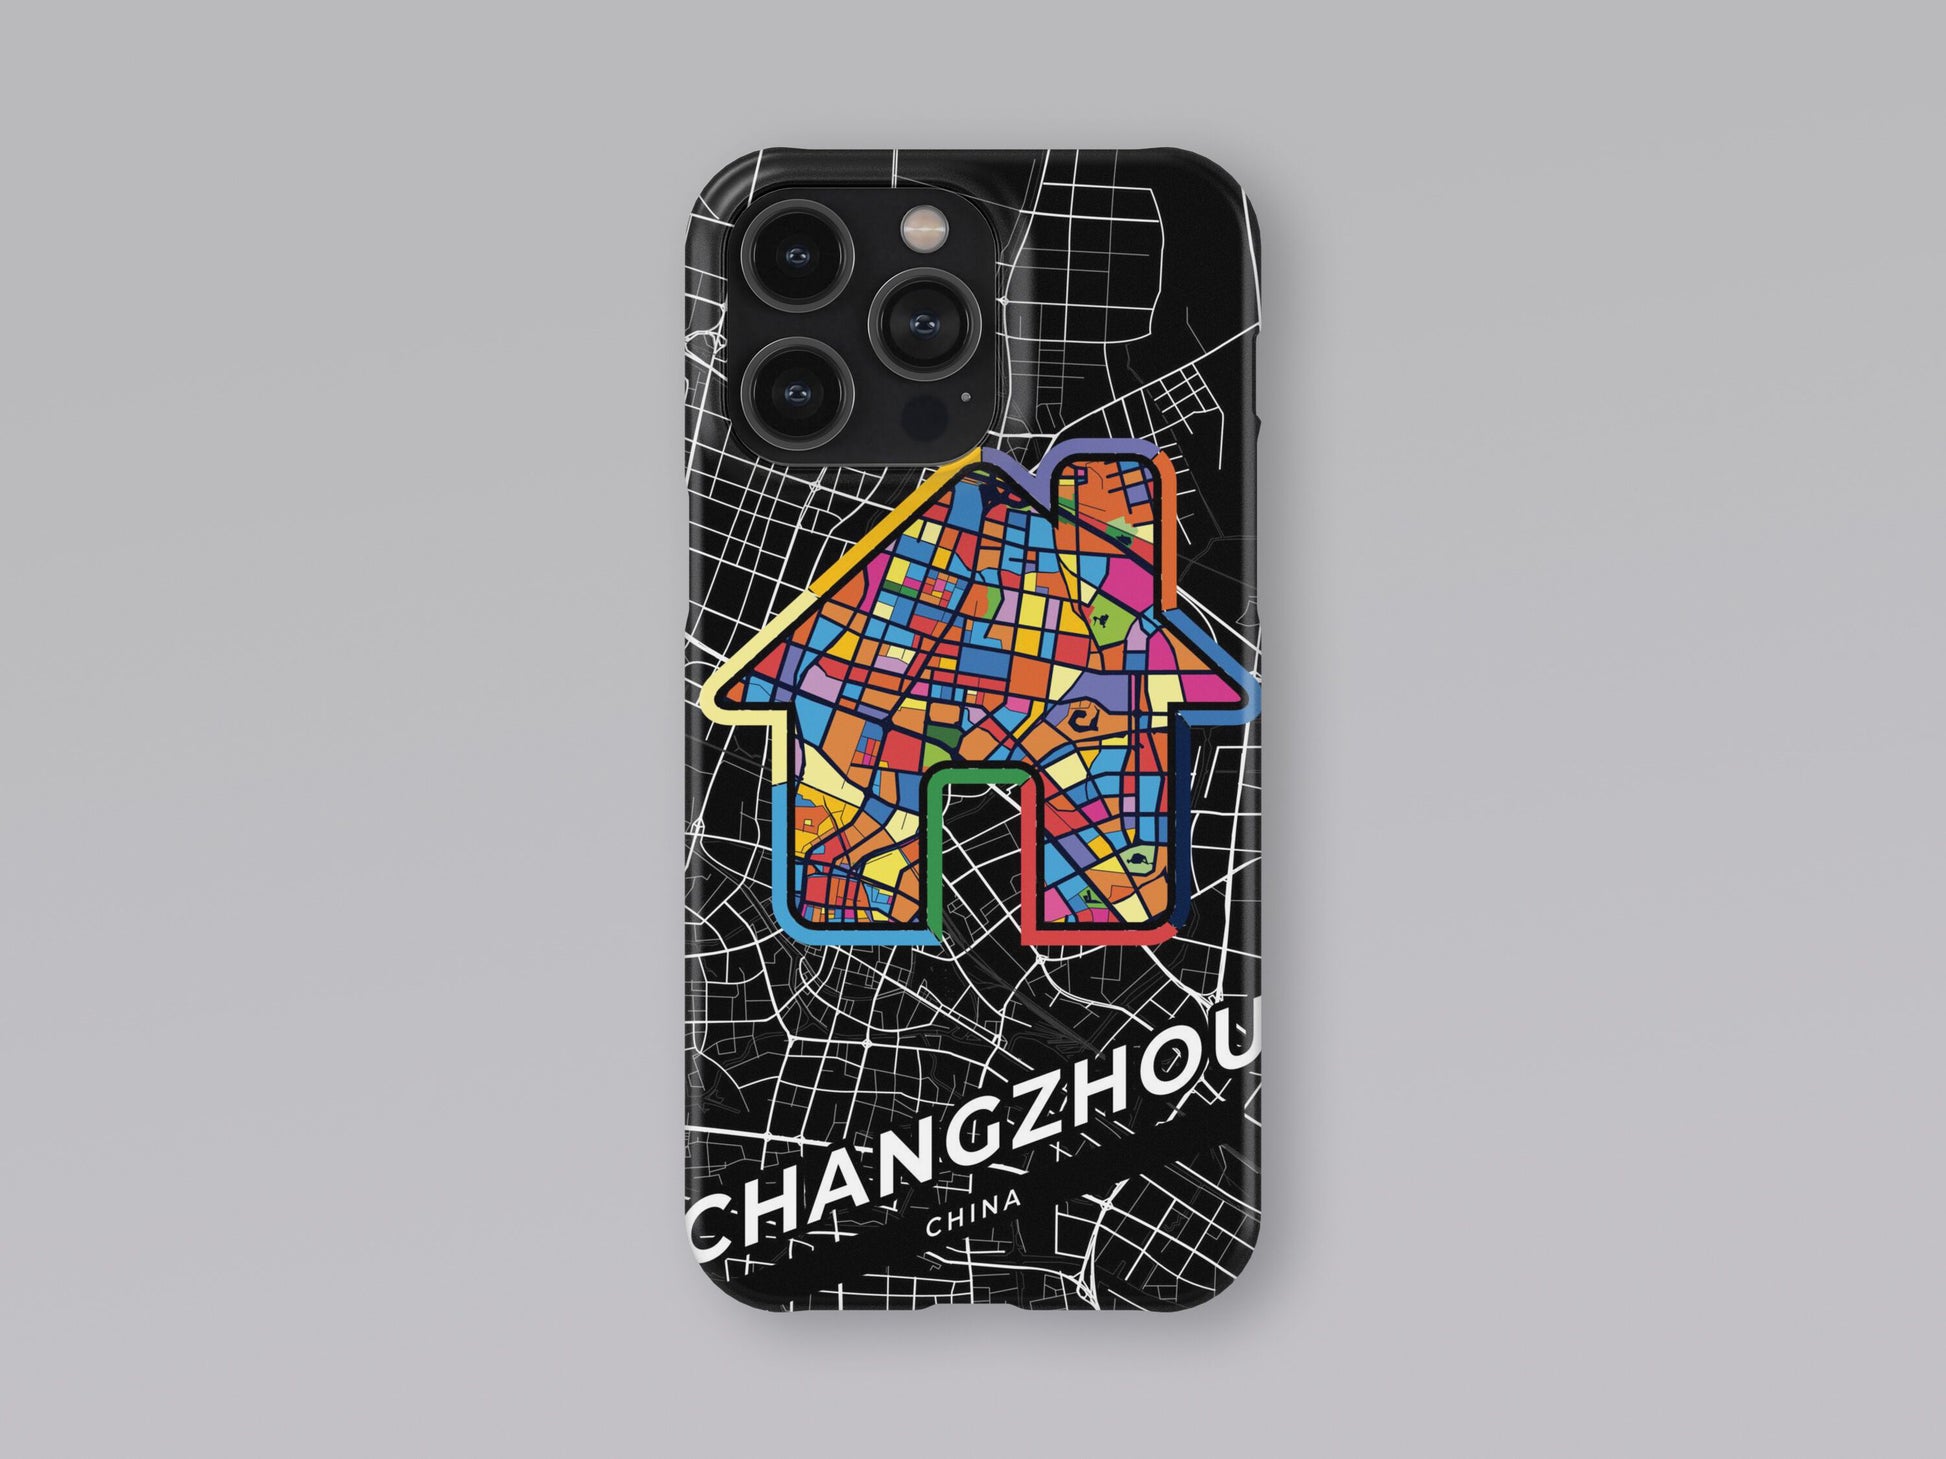 Changzhou China slim phone case with colorful icon. Birthday, wedding or housewarming gift. Couple match cases. 3